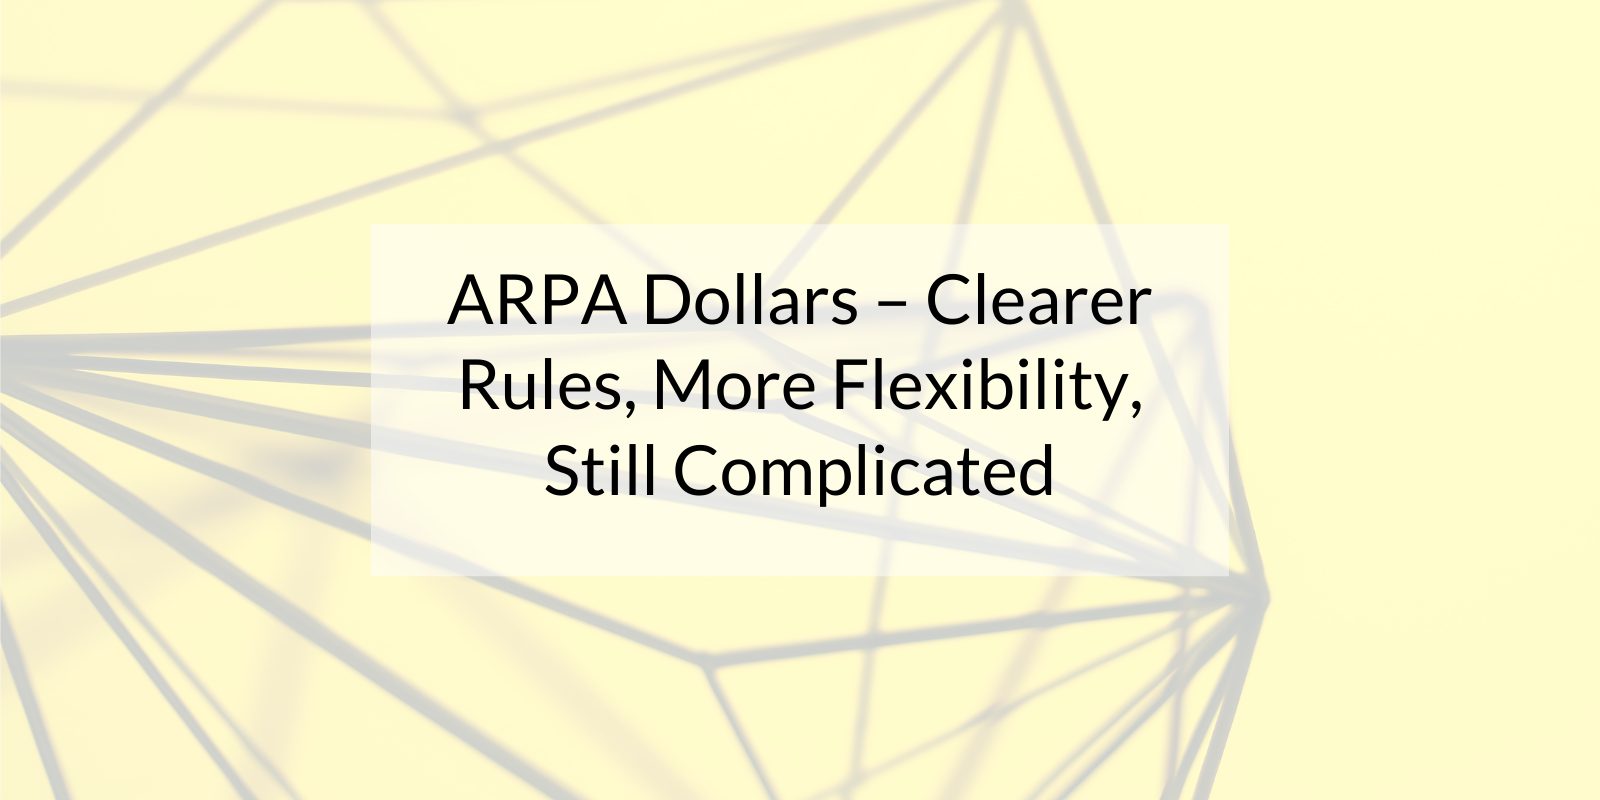 ARPA Dollars - clearer rules, more flexibility, still complicated